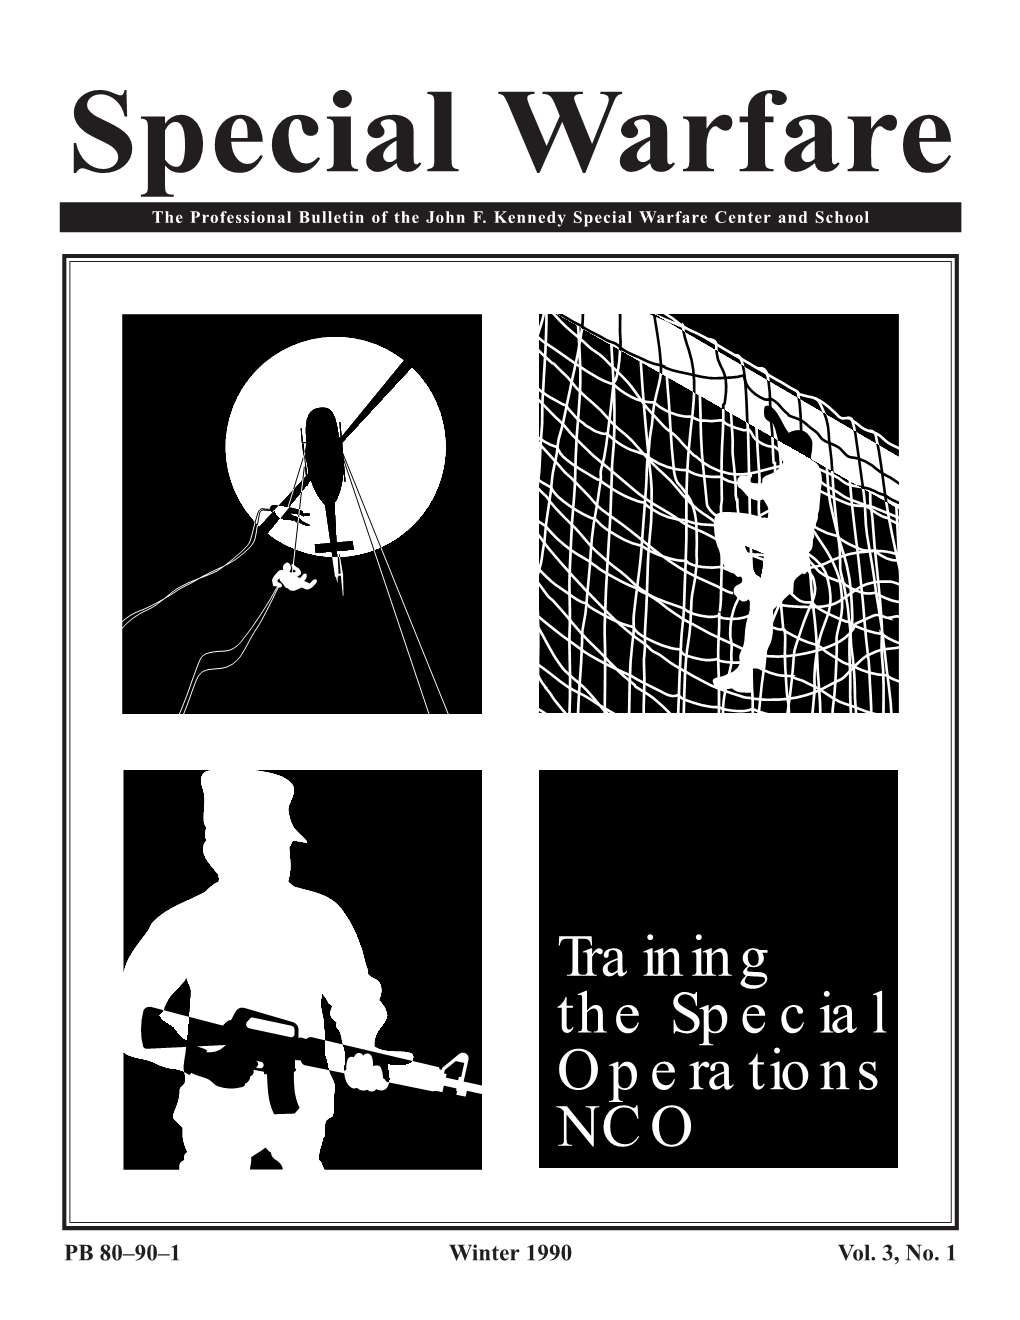 Training the Special Operations NCO